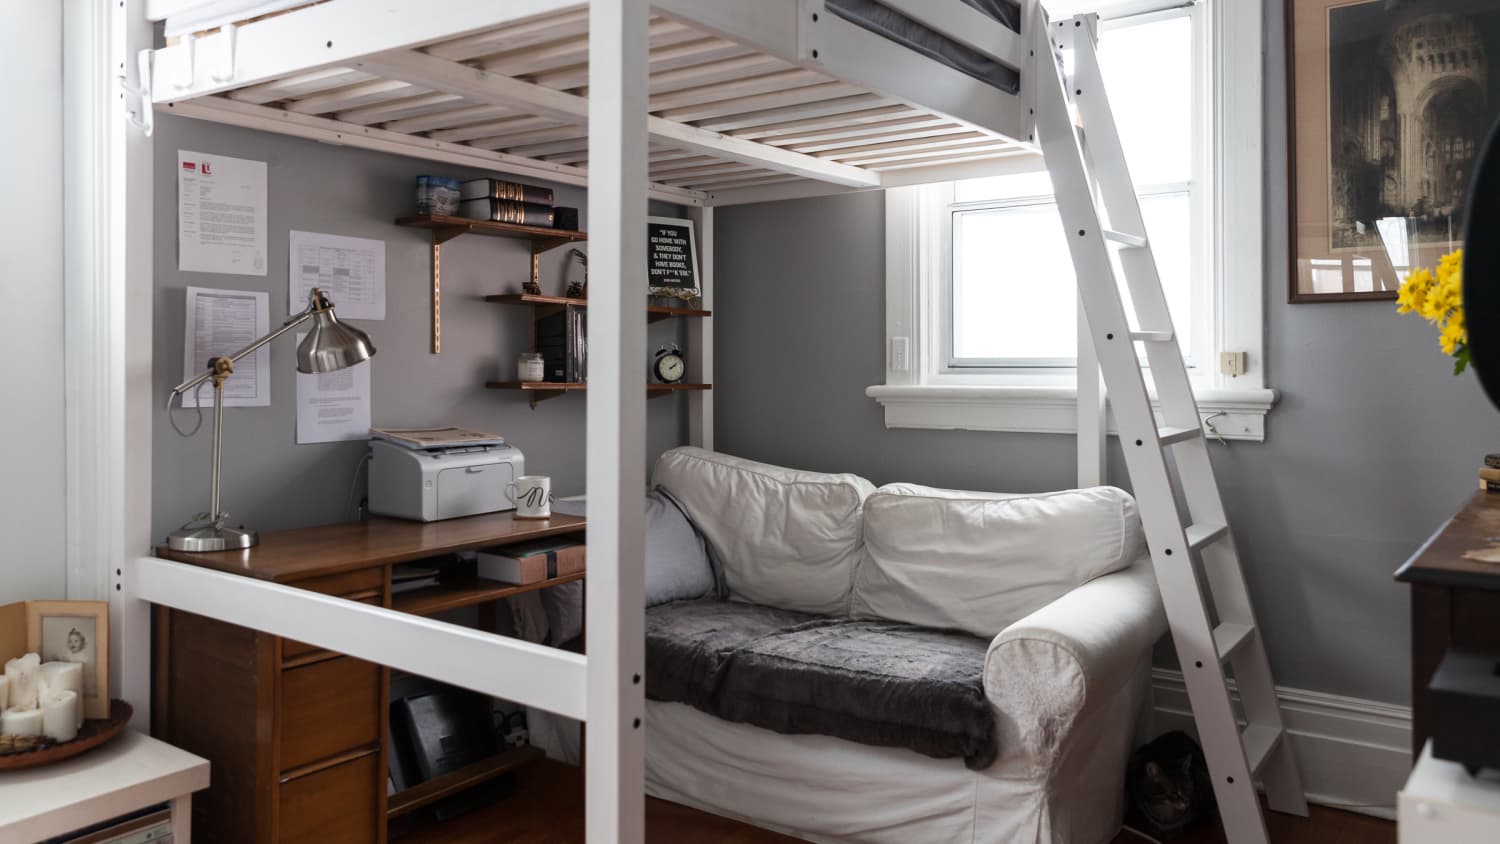 10 Full Size Modern Loft Beds For Adults | Apartment Therapy